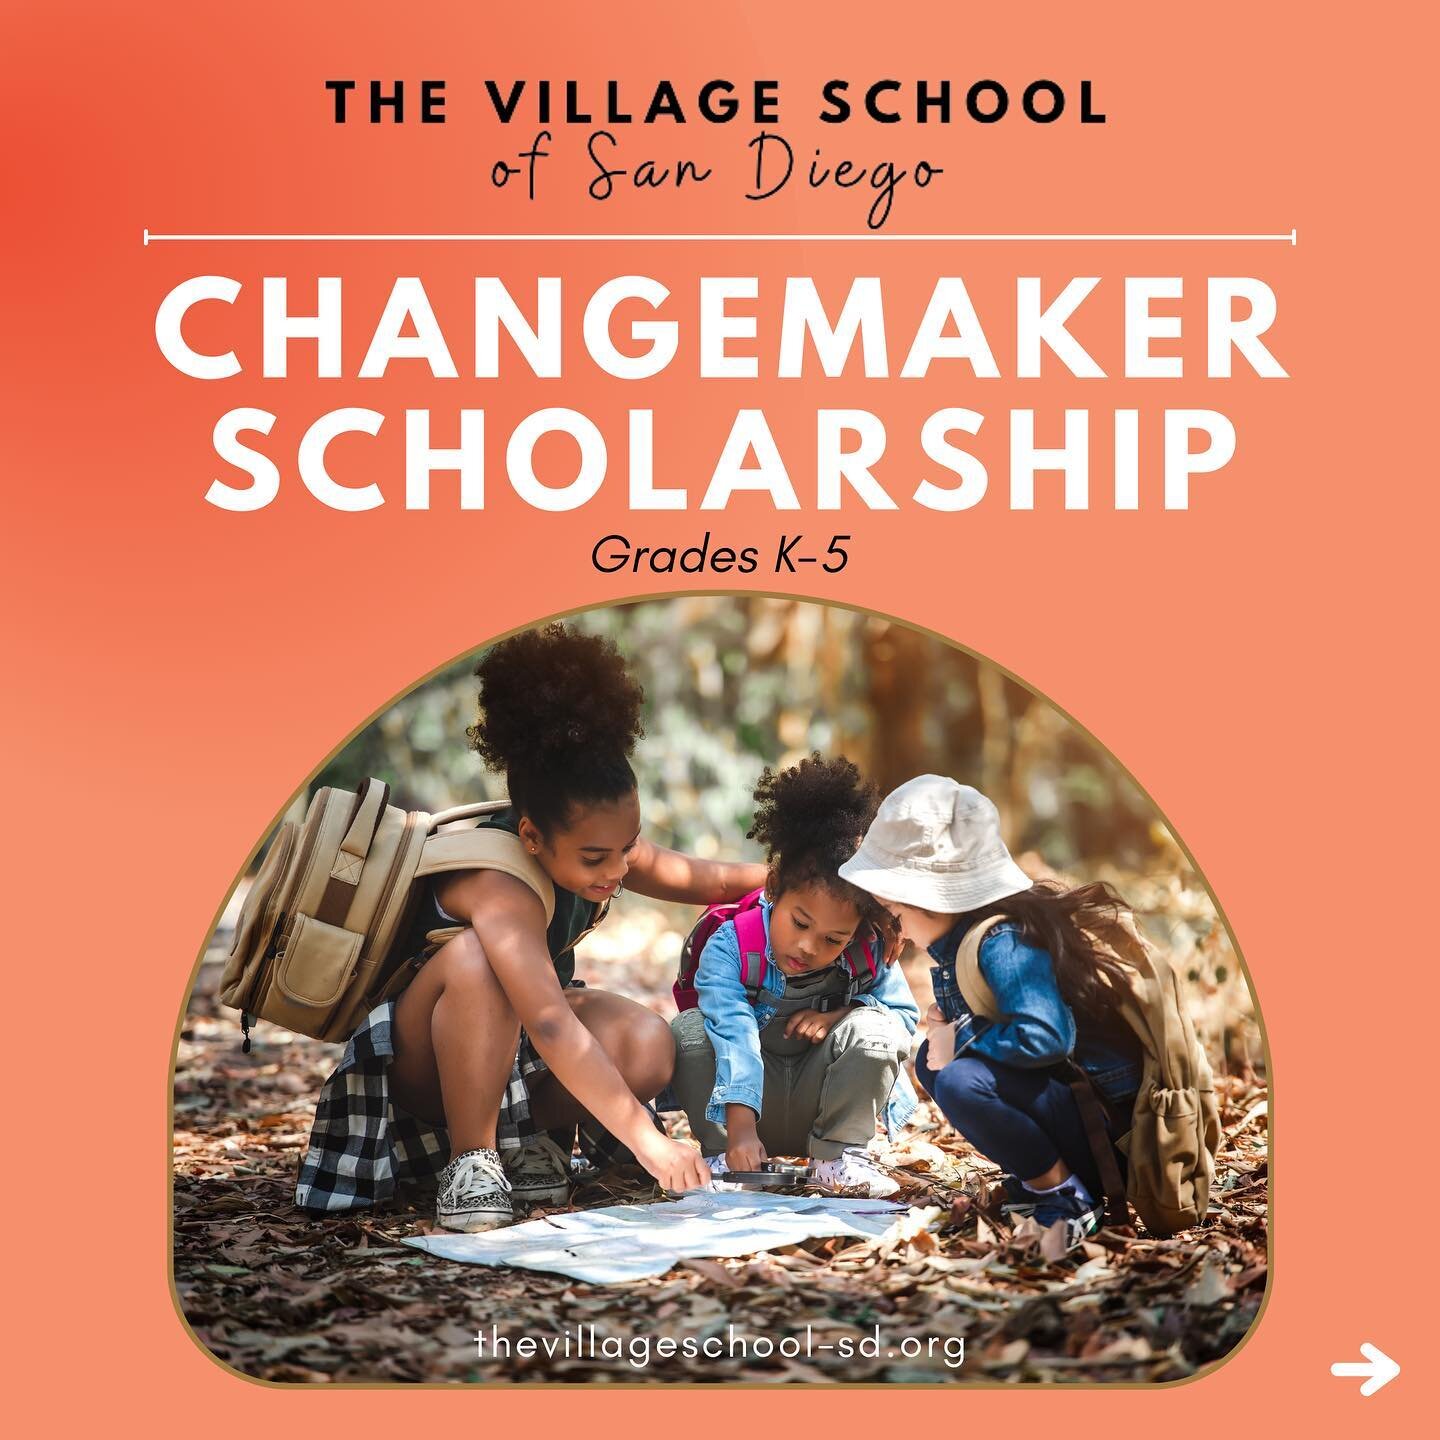 Apply at www.thevillageschool-sd.org by July 31, 2022.